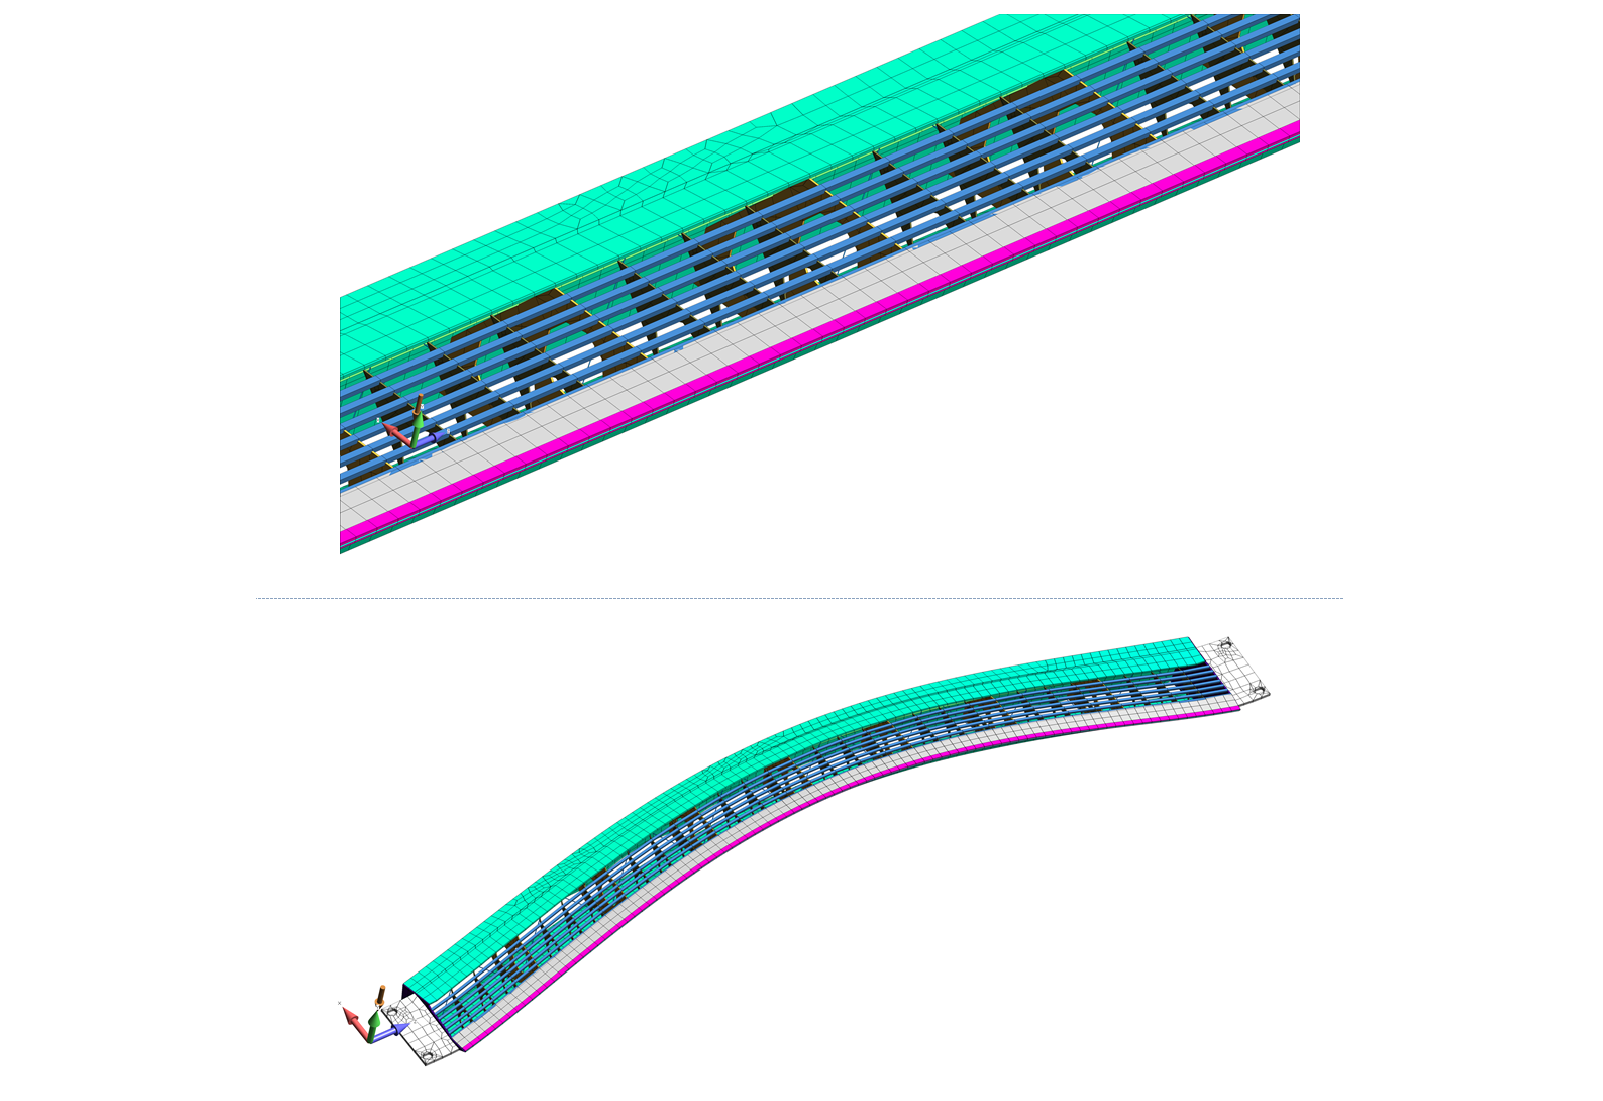 Normal modes analysis using Simcenter NX Nastran of a paper mill forming board.  Optimization of the structure developed a design that was stiffer and lighter than any other structure on the marked Predictive Engineering FEA Digital Prototyping Services